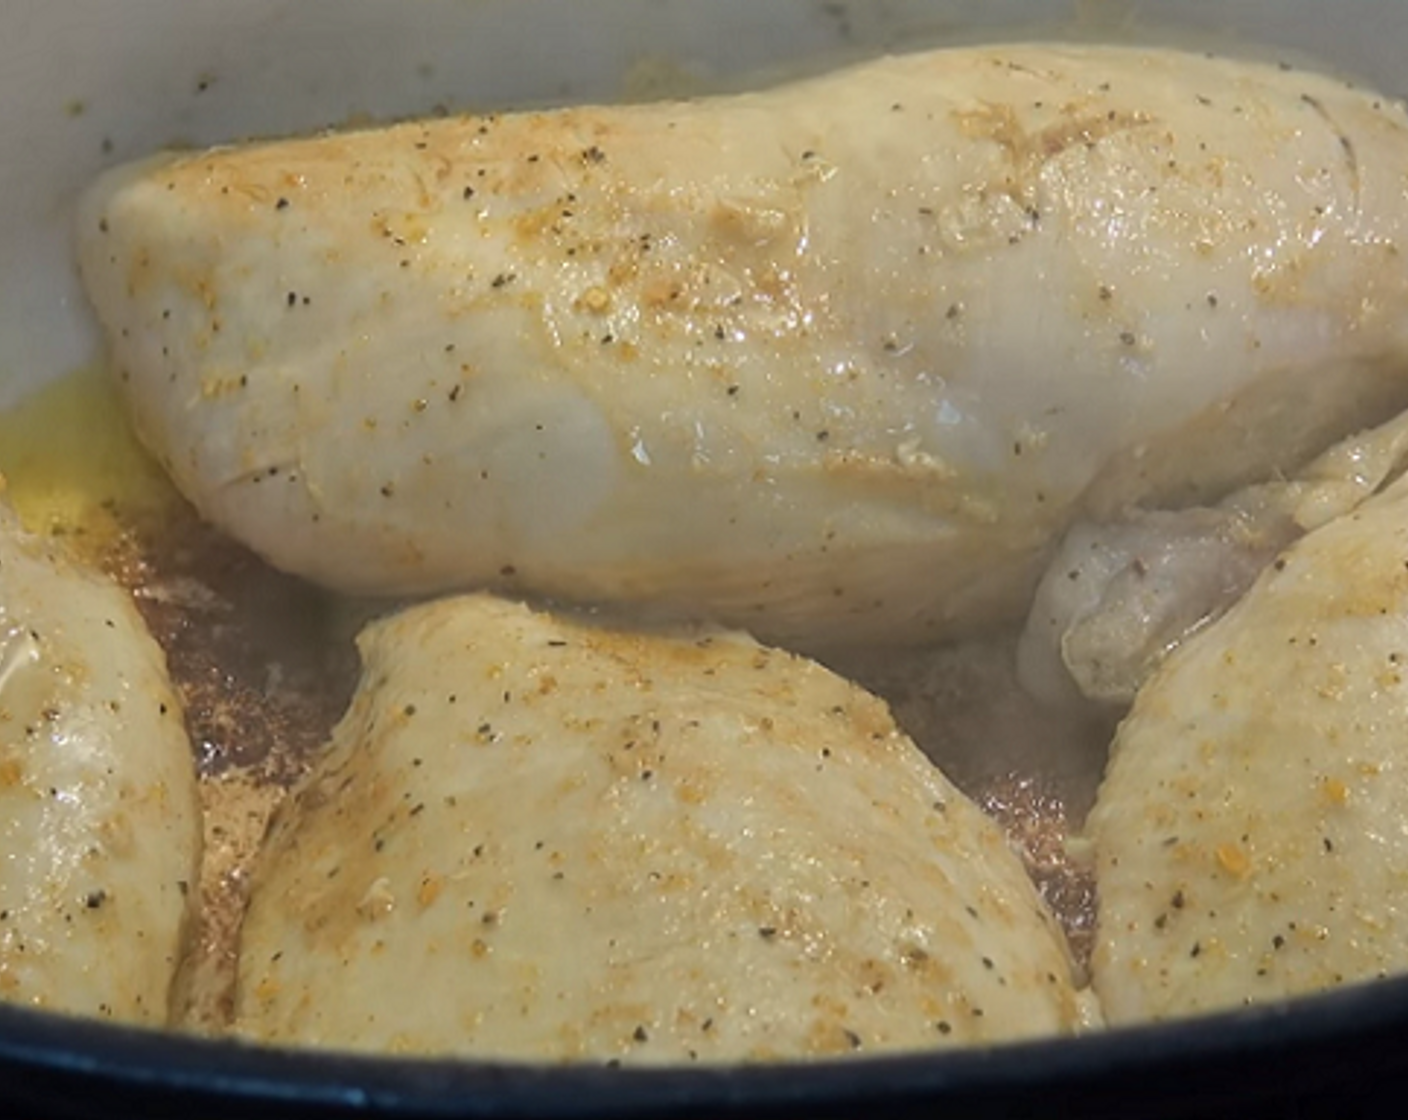 step 2 In a flame-proof roasting pan, add some Olive Oil (as needed) and place the seasoned chicken. Brown on medium heat for about two minutes on each side, or until nicely browned. Transfer to a plate and set aside.